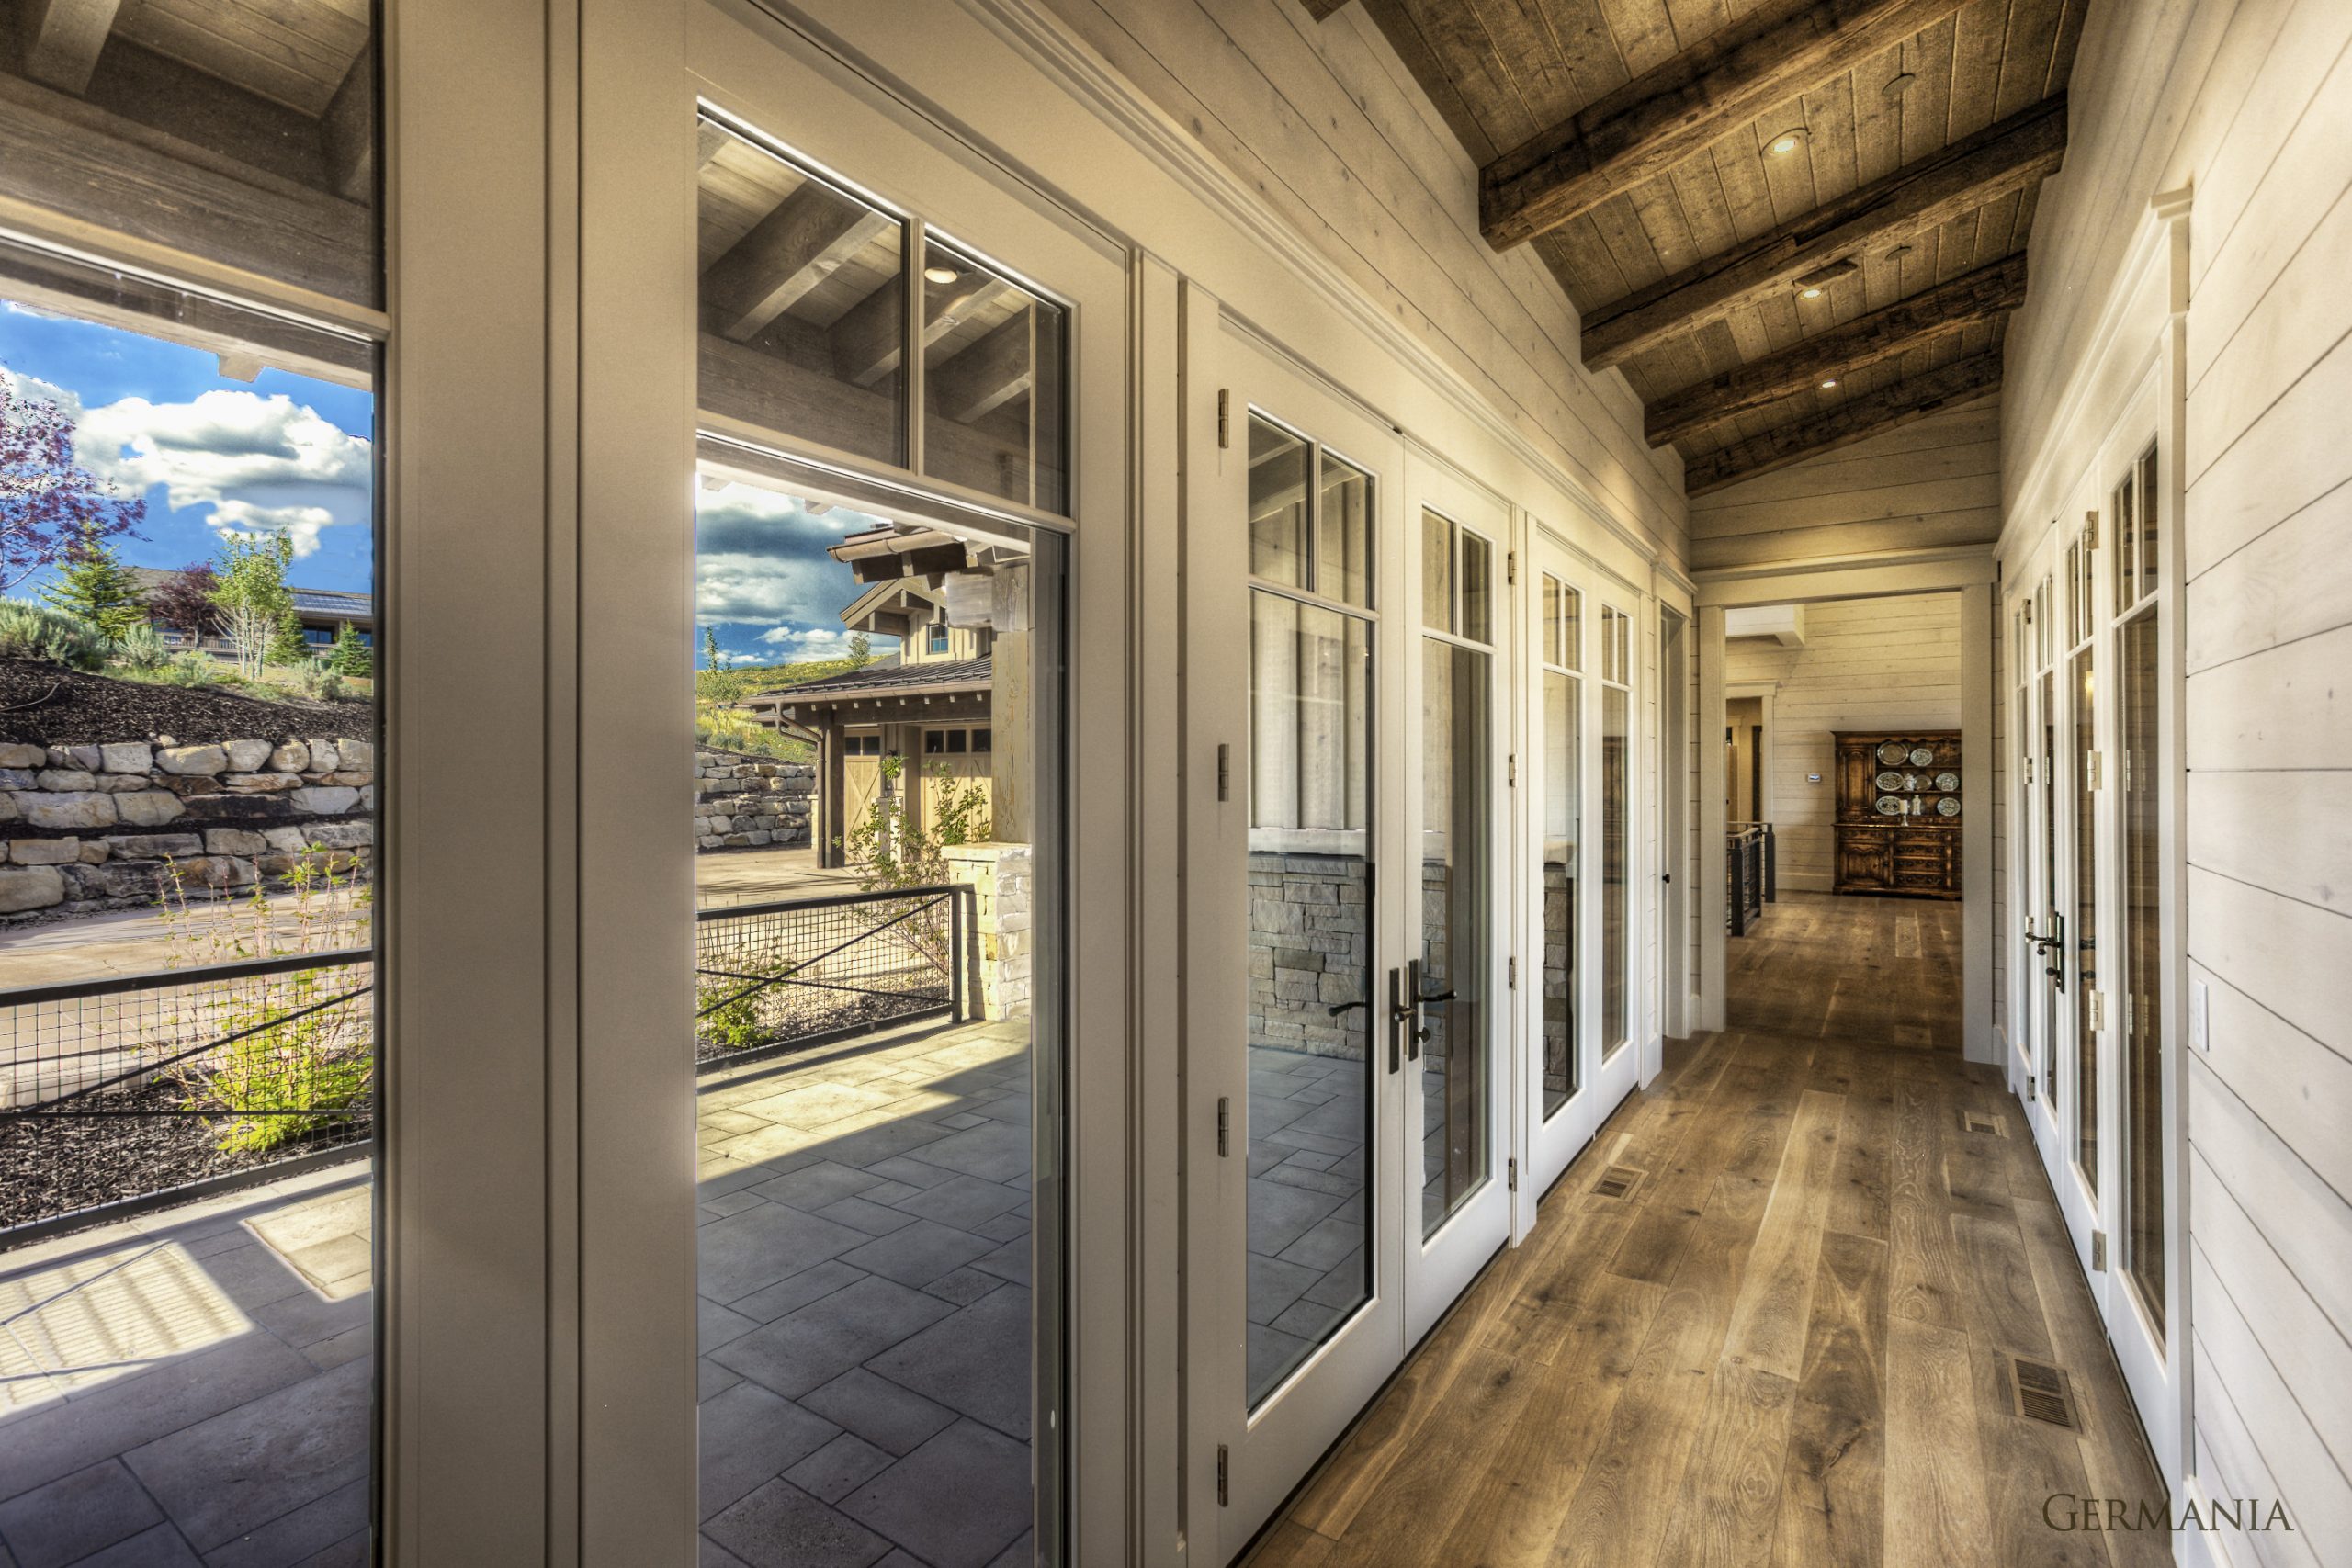 Germania Construction specializes in custom contemporary homes in Park City Utah and the surrounding regions. Contact us and check out more of our portfolios on our website.